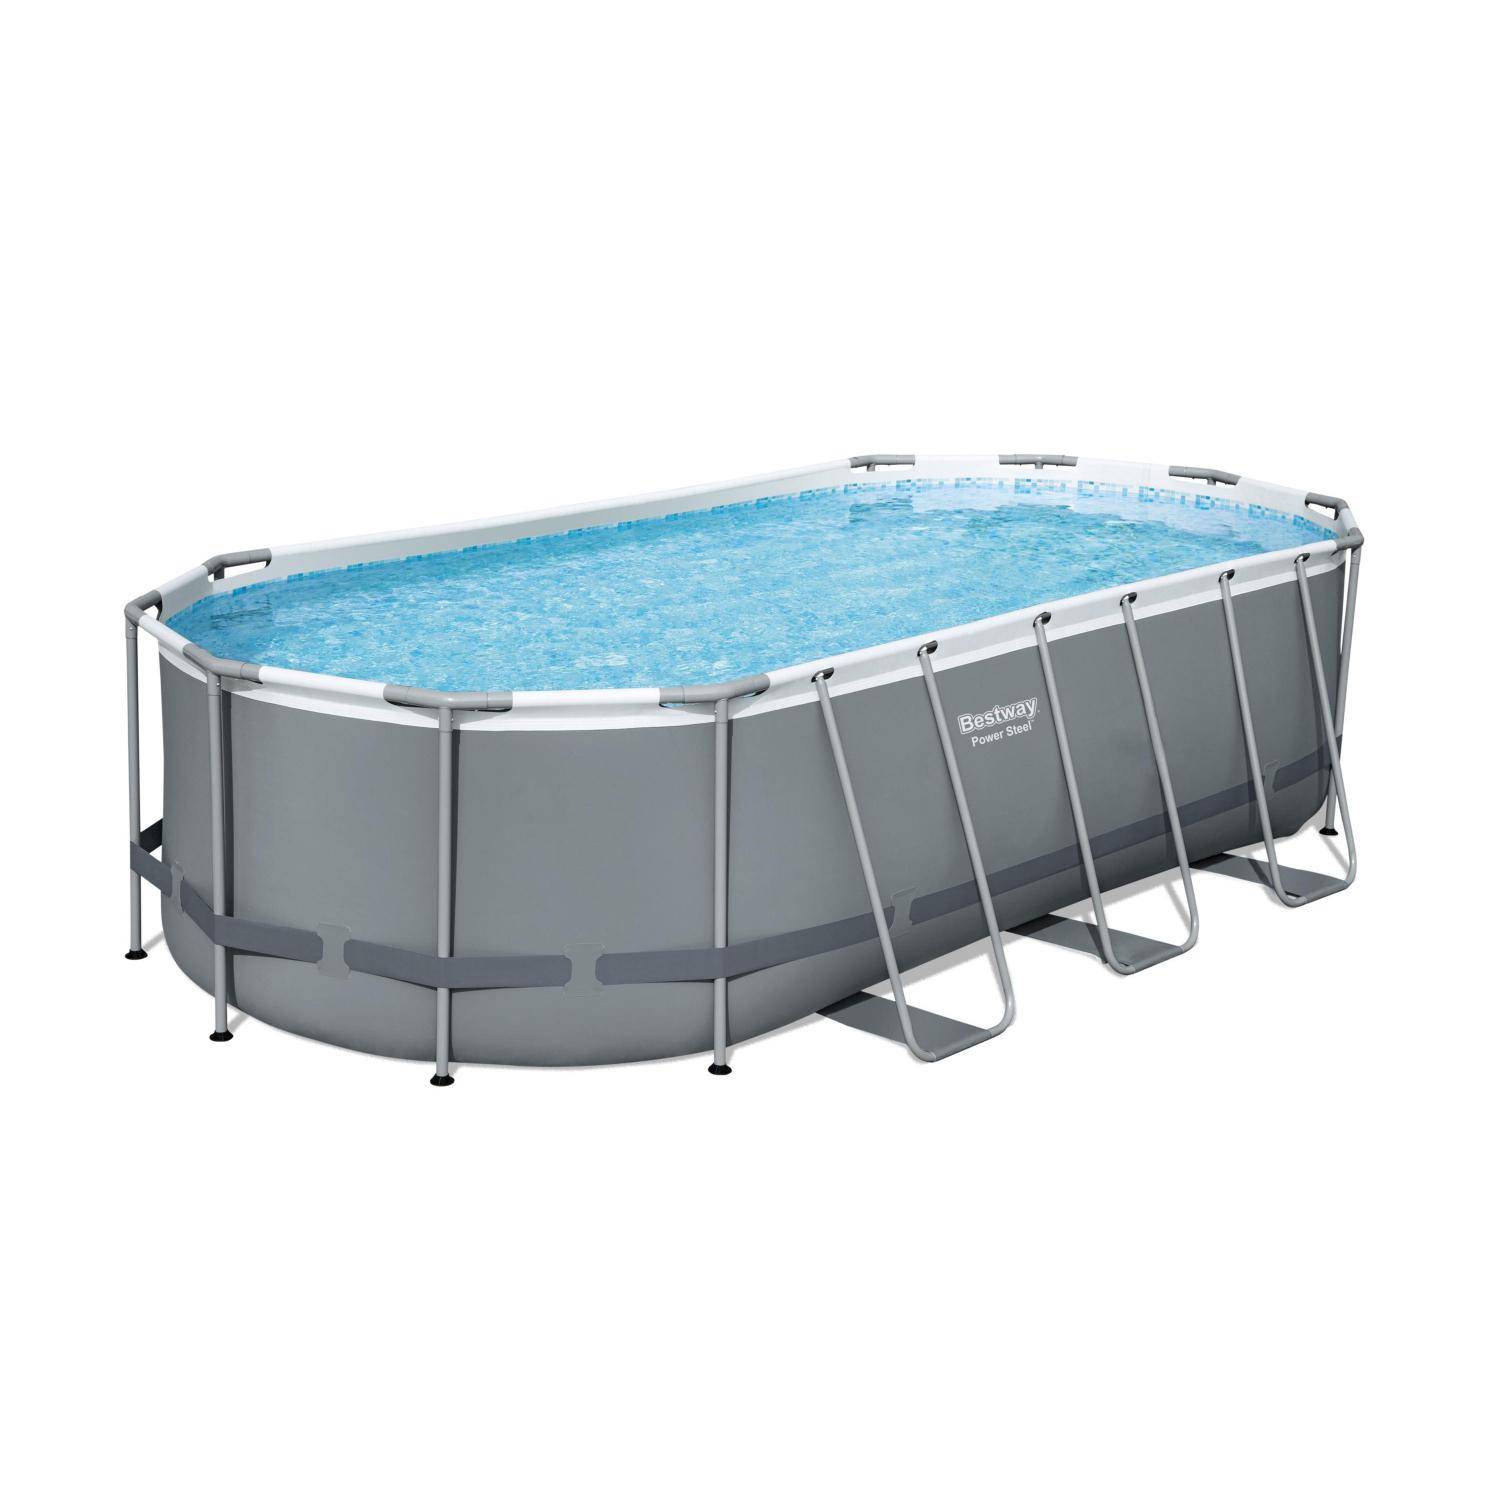 5x3m above ground tubular swimming pool, grey, rectangular, with pump, filter cartridge, diffuser, cover and ladder - Bestway Spinelle - Grey Photo2